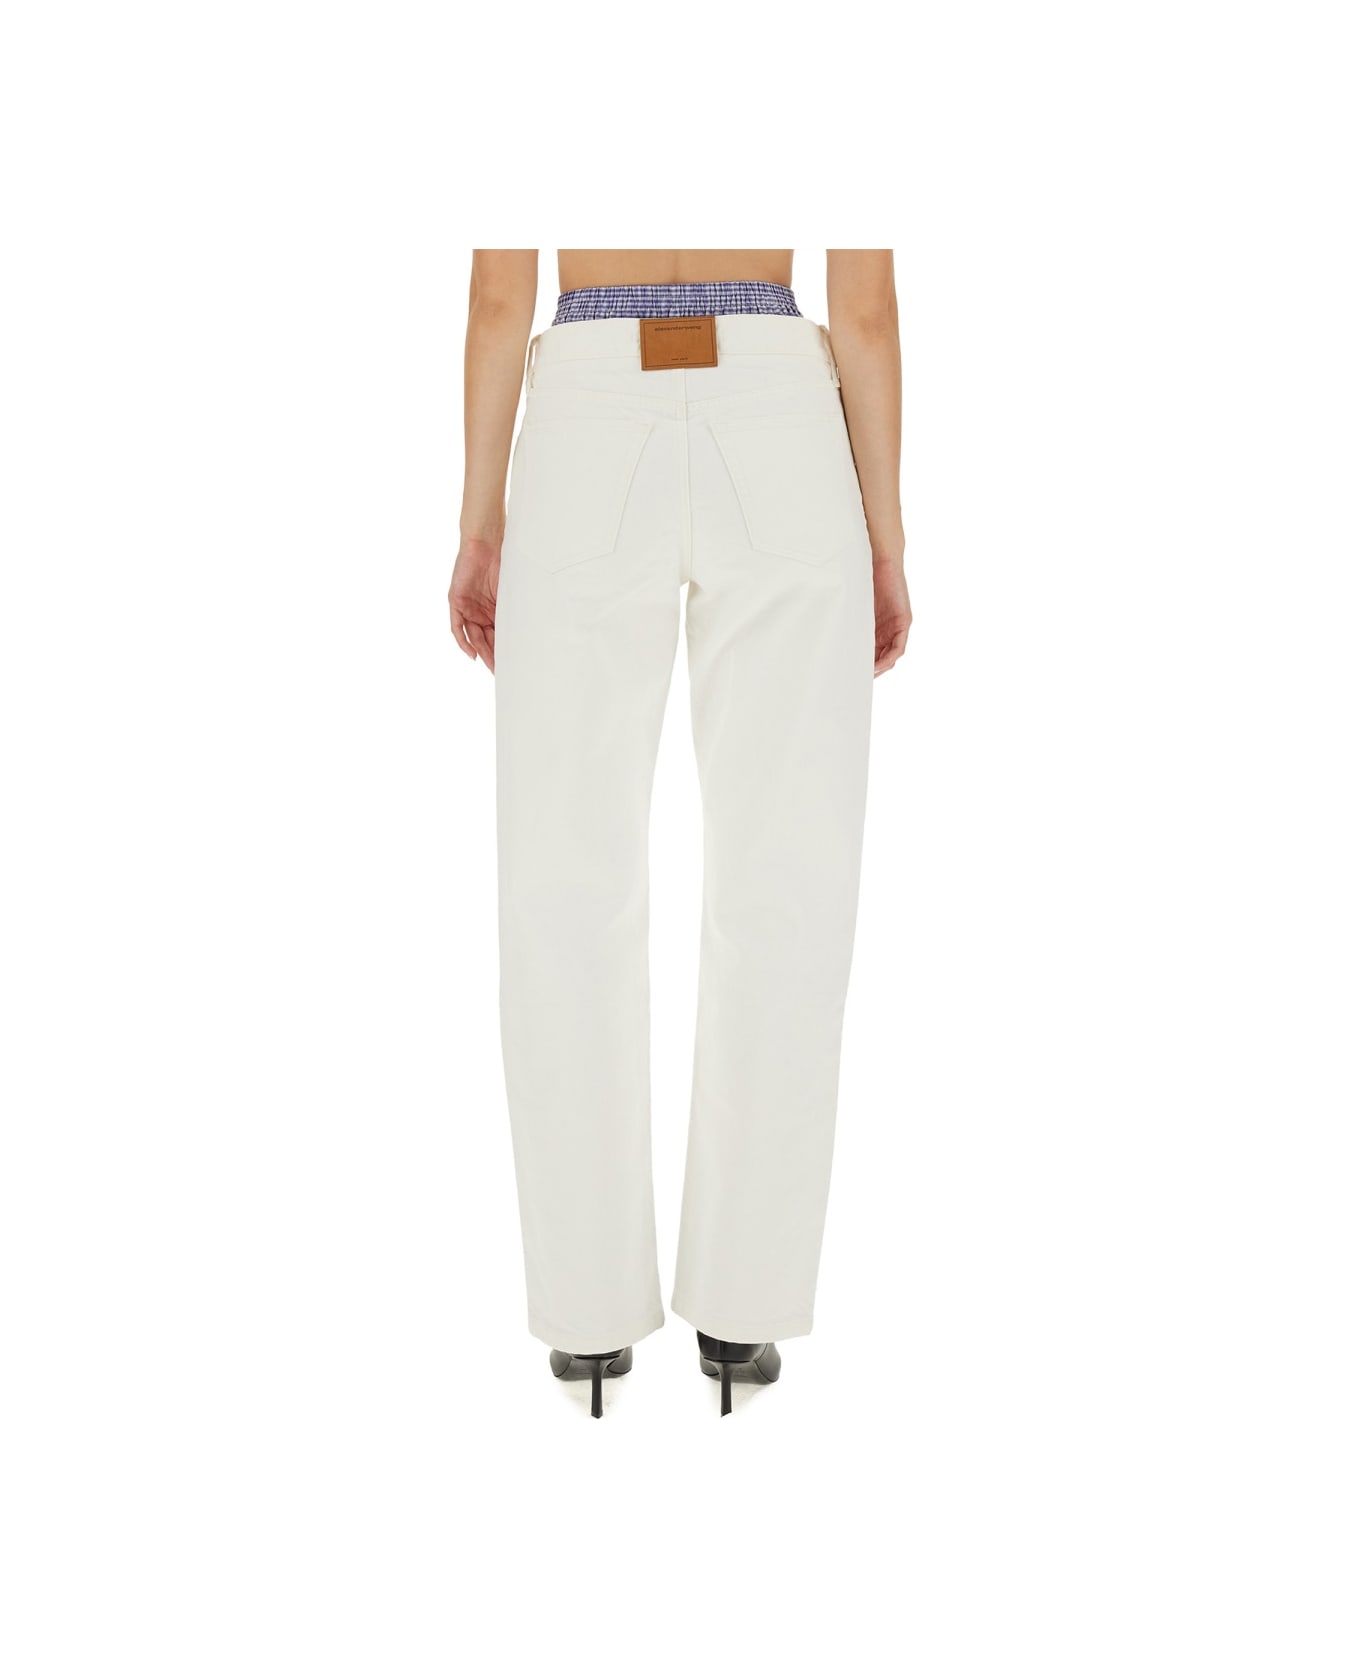 Alexander Wang Skater Jeans With High Waist Boxer Shorts - WHITE ボトムス